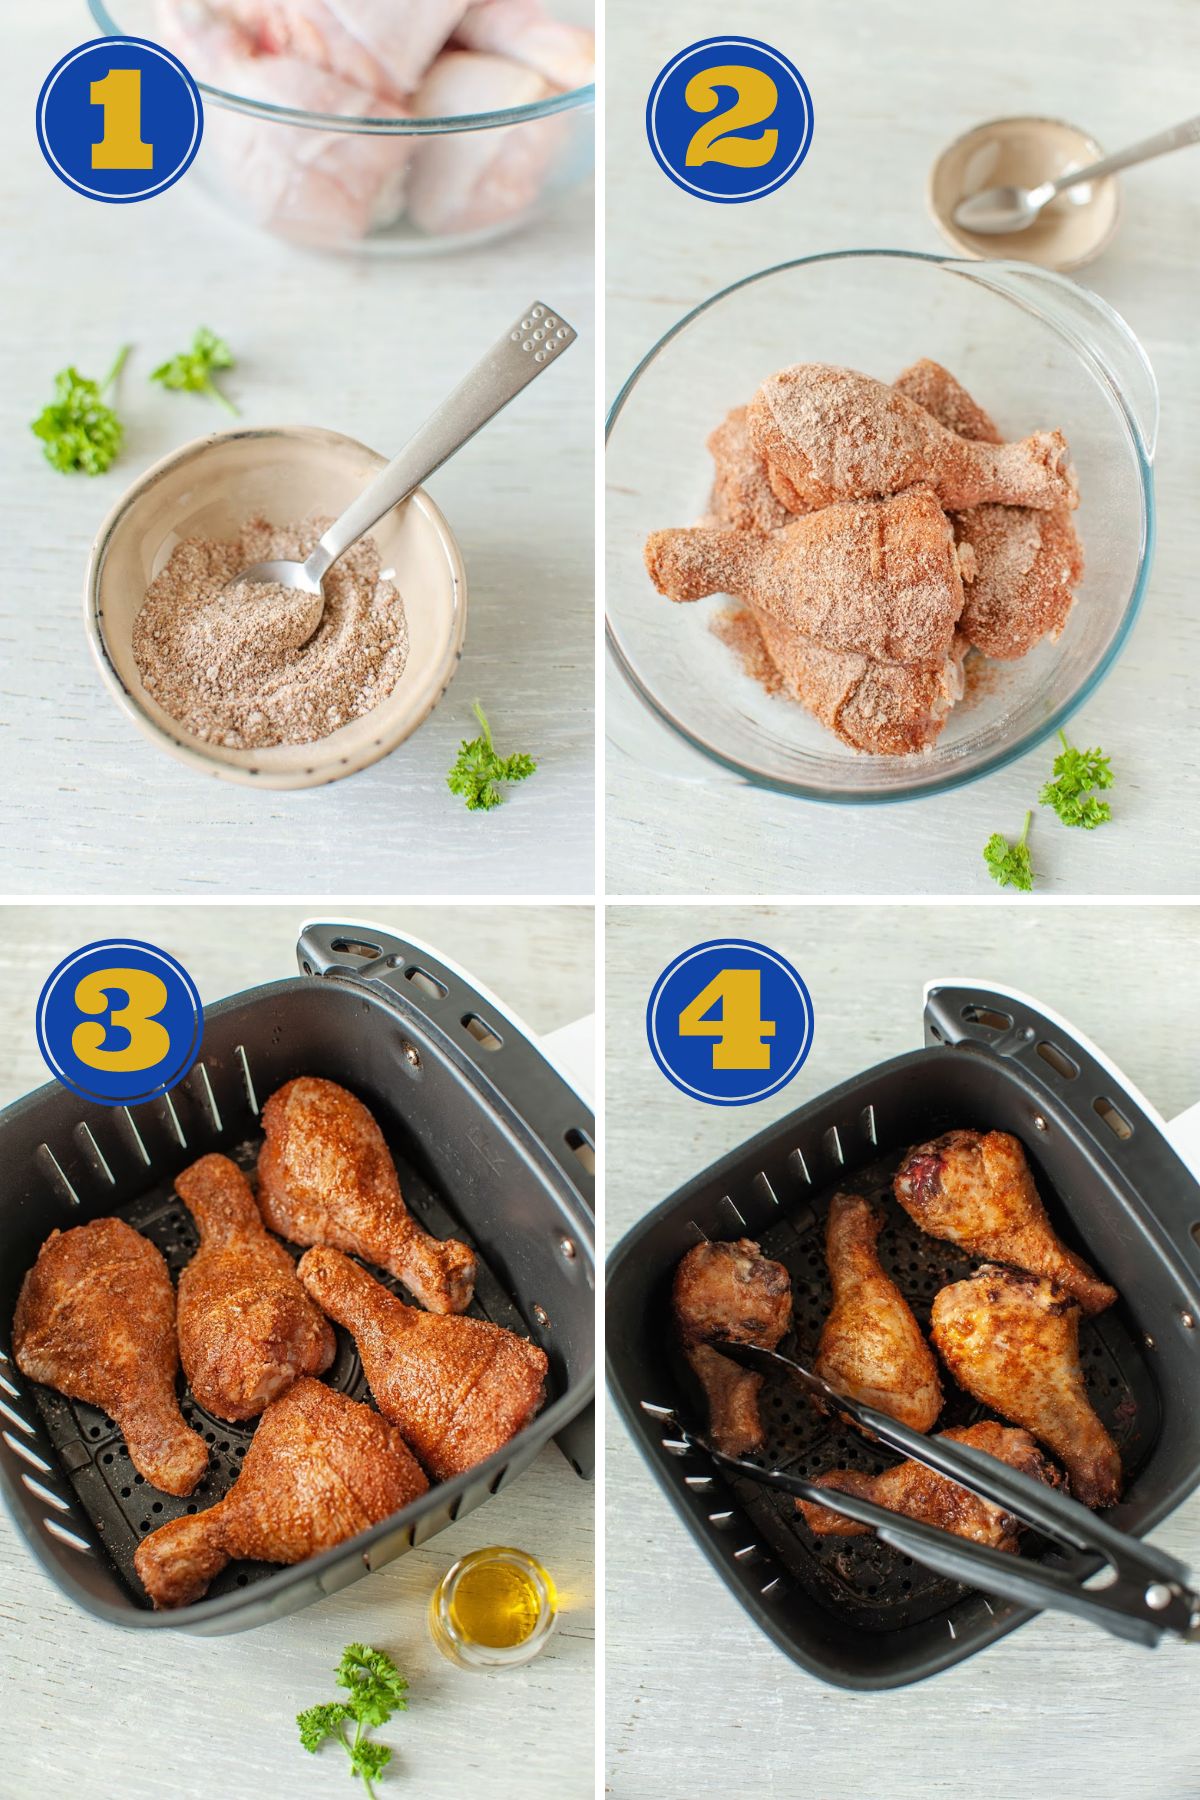 step-by-step instructions for how to make air fryer fried chicken legs - four photos showing mixing the seasoning, adding it to raw chicken legs, adding the chicken legs to the air fryer basket, and flipping the chicken legs halfway through cooking